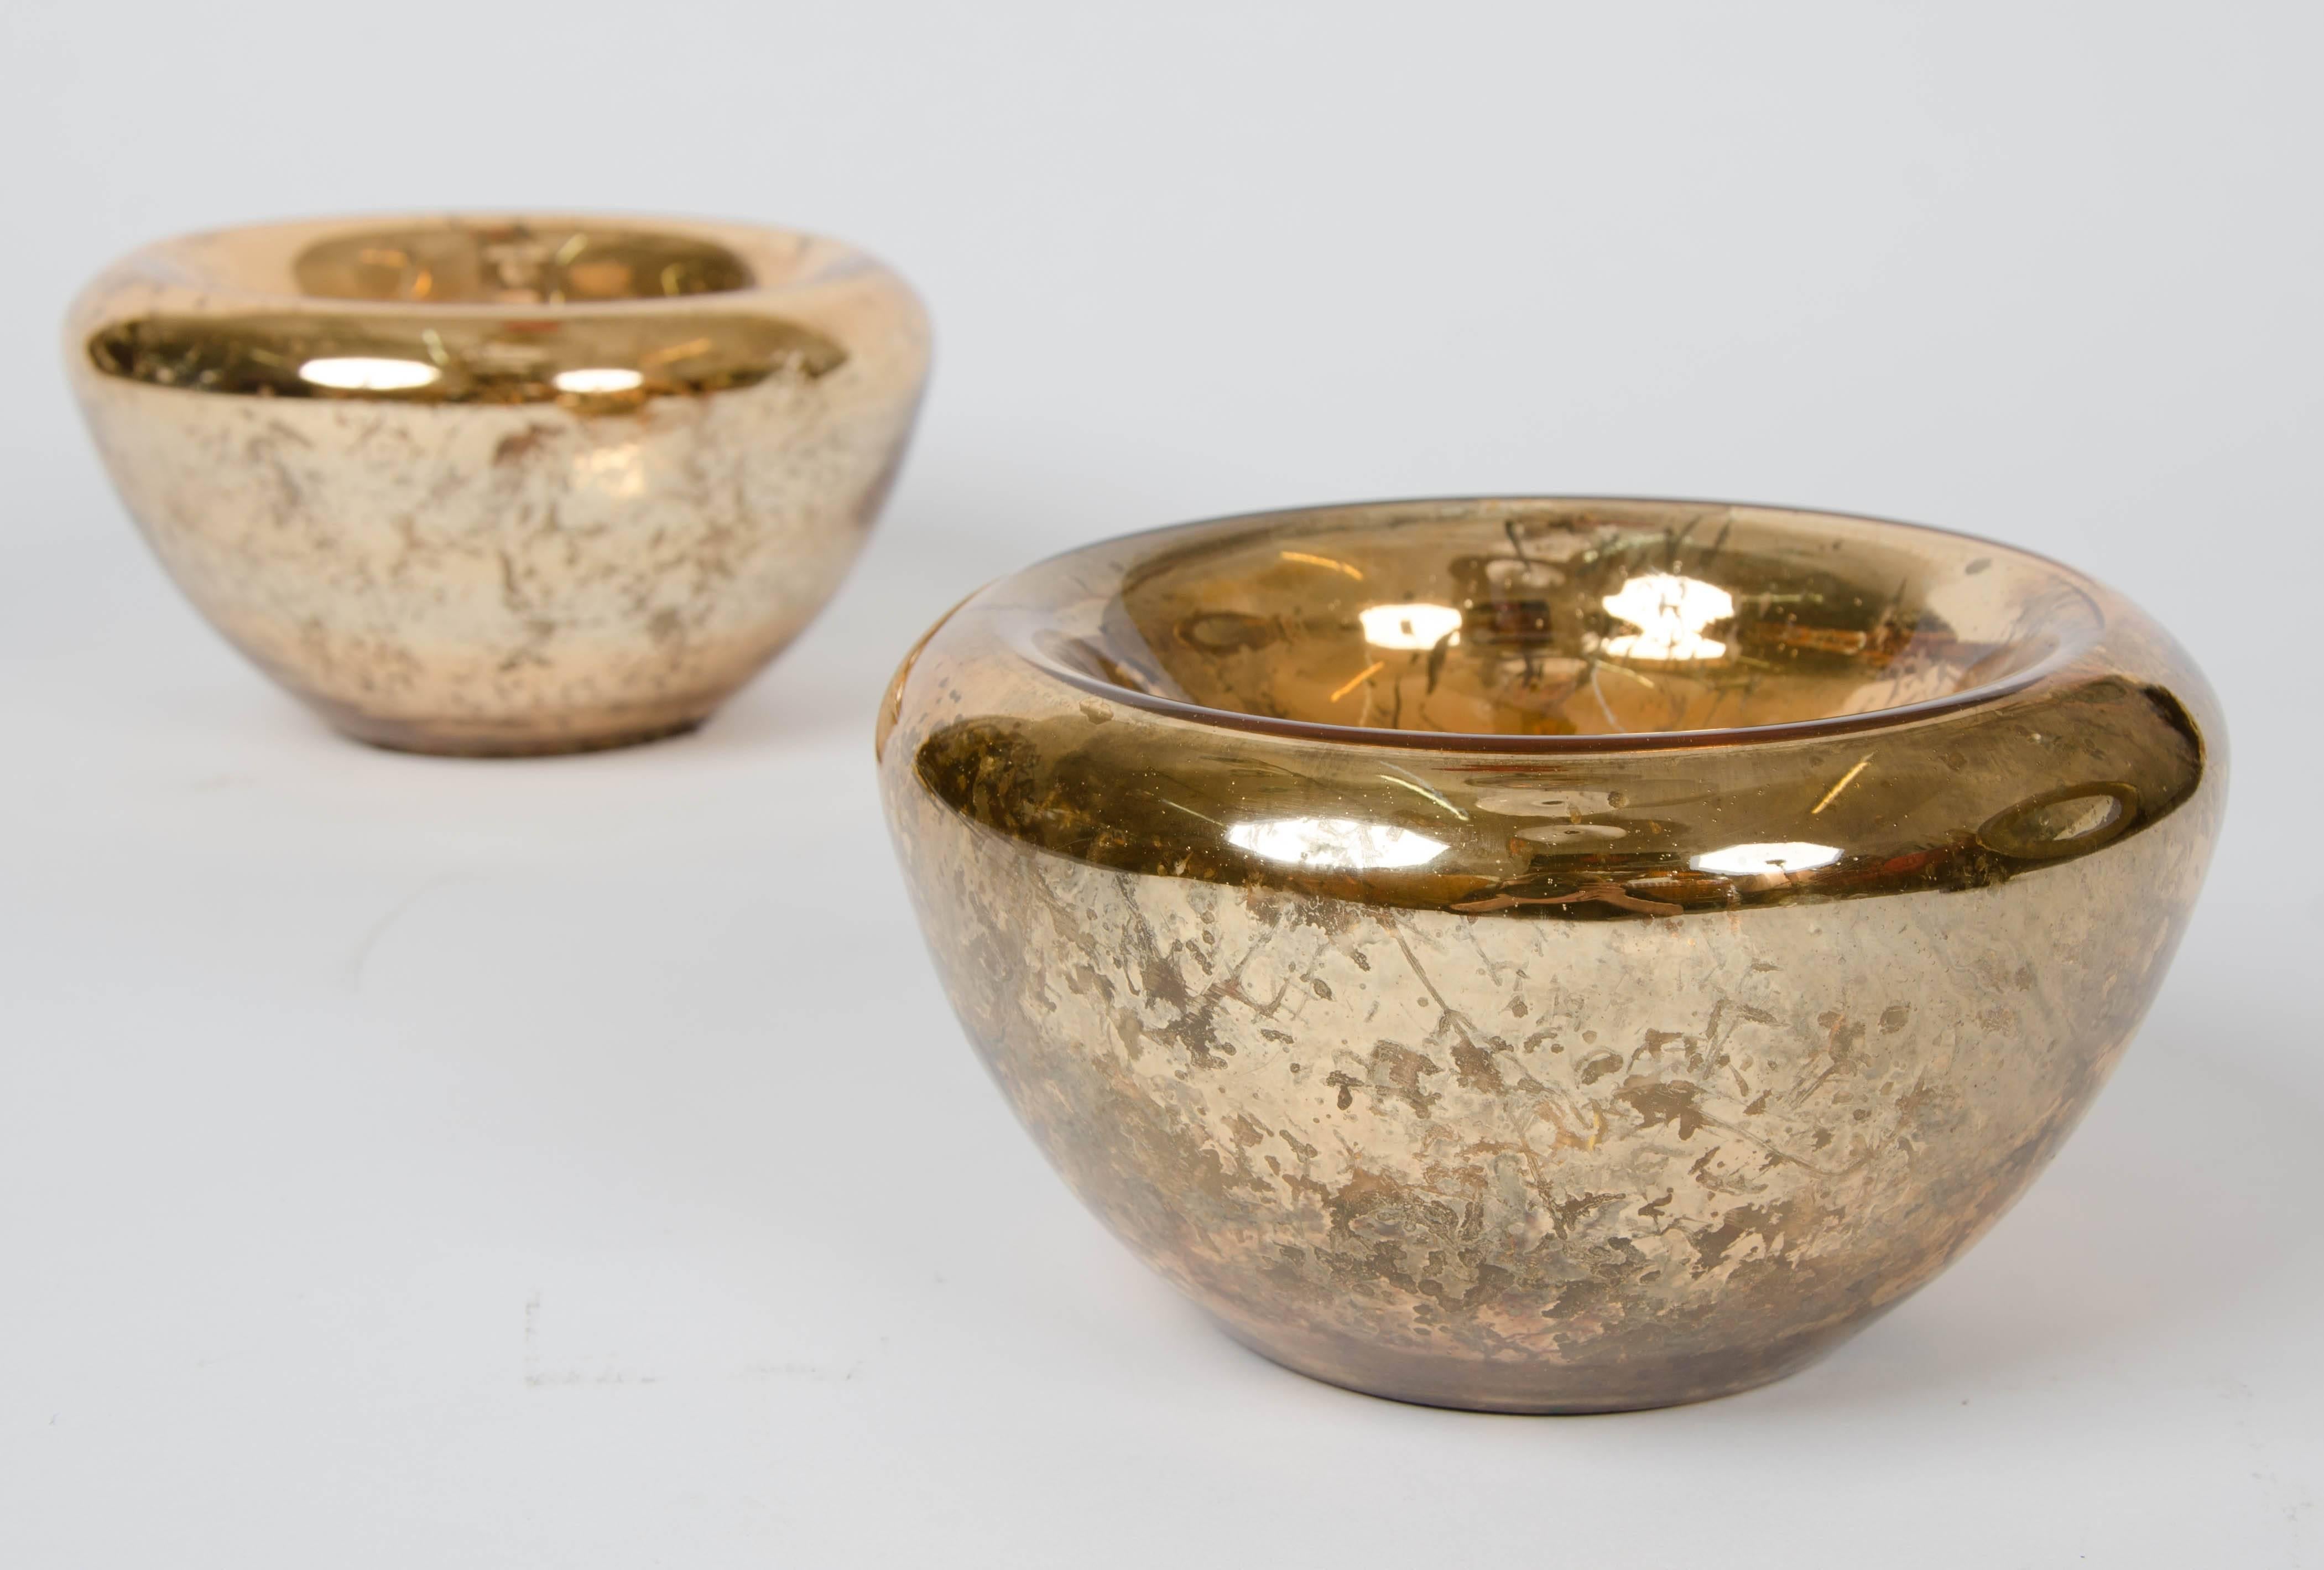 1960s pair of Murano glass bowls gilded with a gold foil.